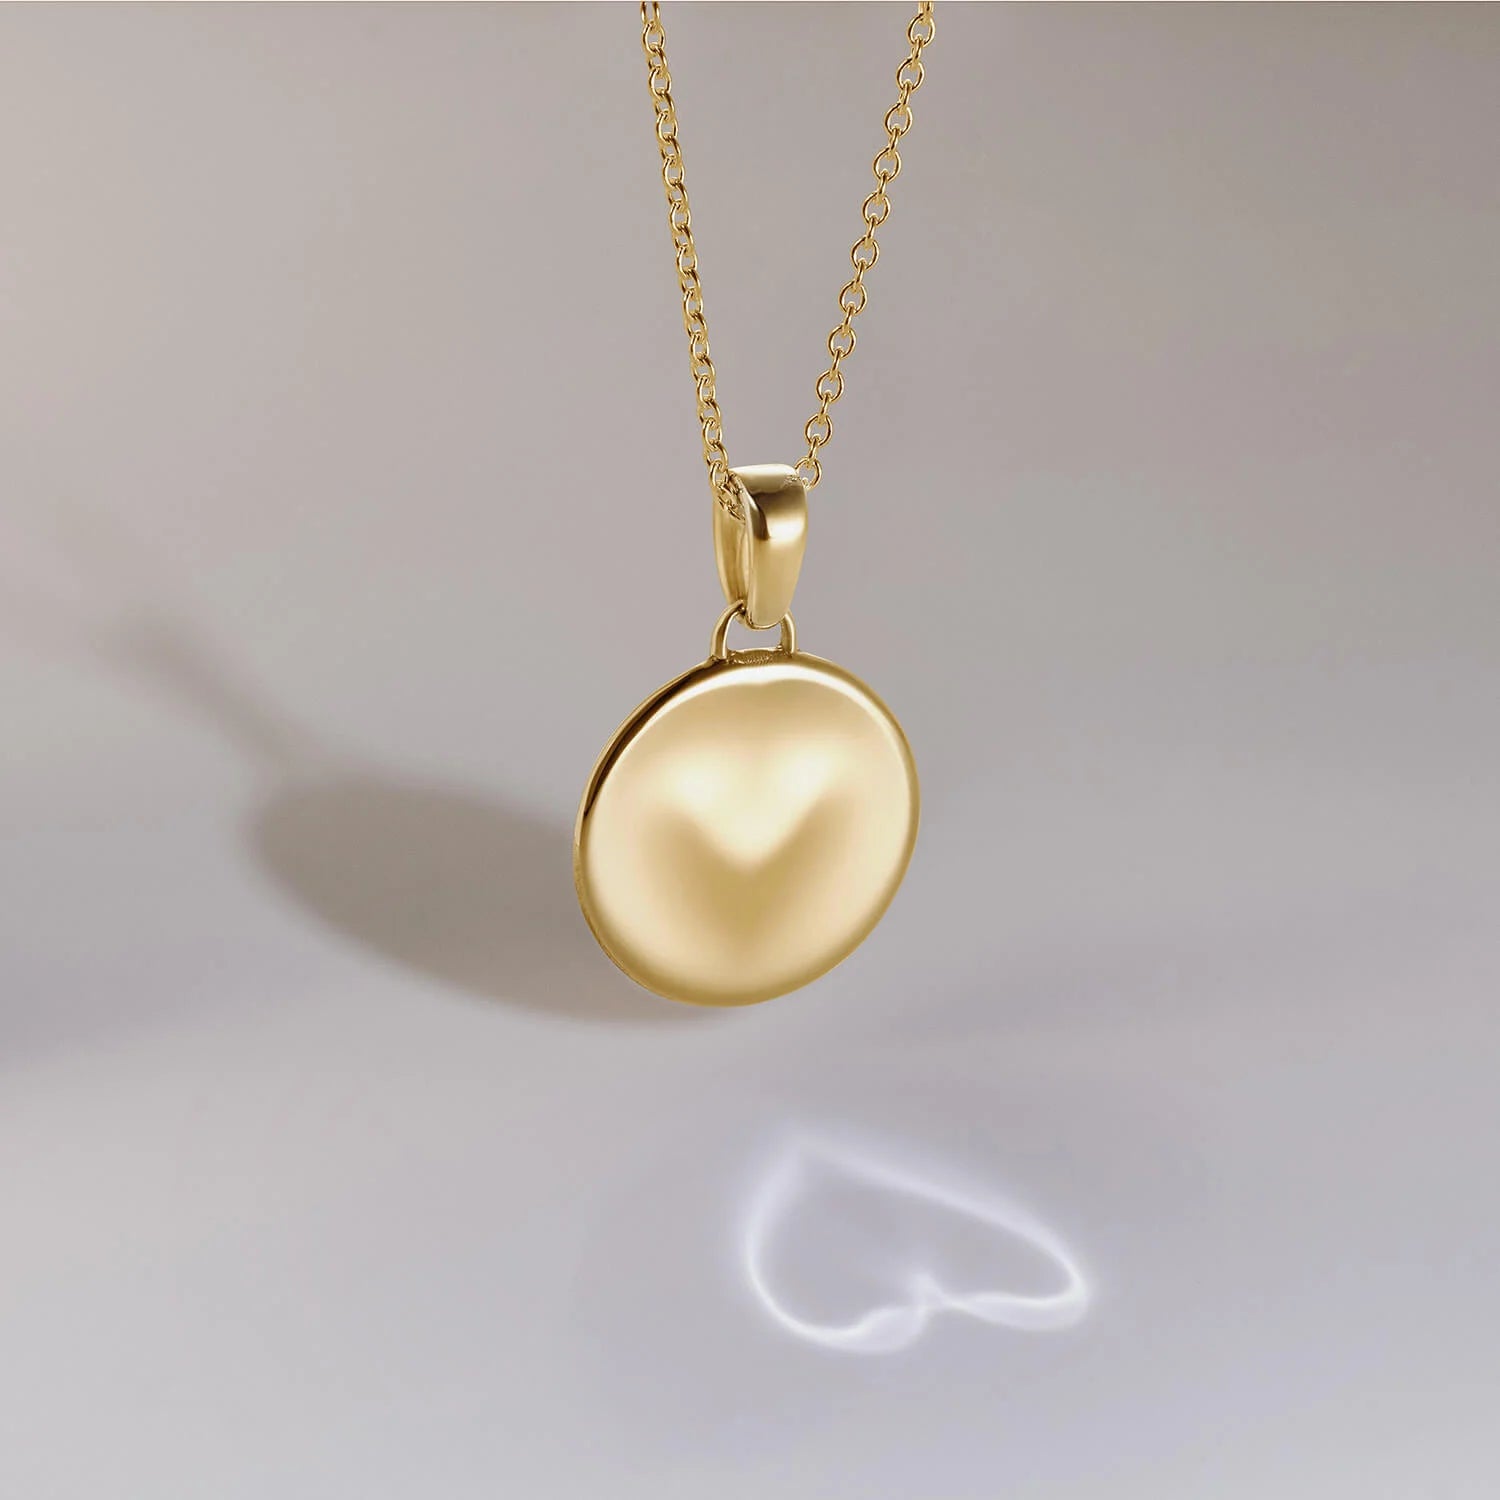 886 Caustic Heart Pendant With Chain in 18ct Yellow Gold